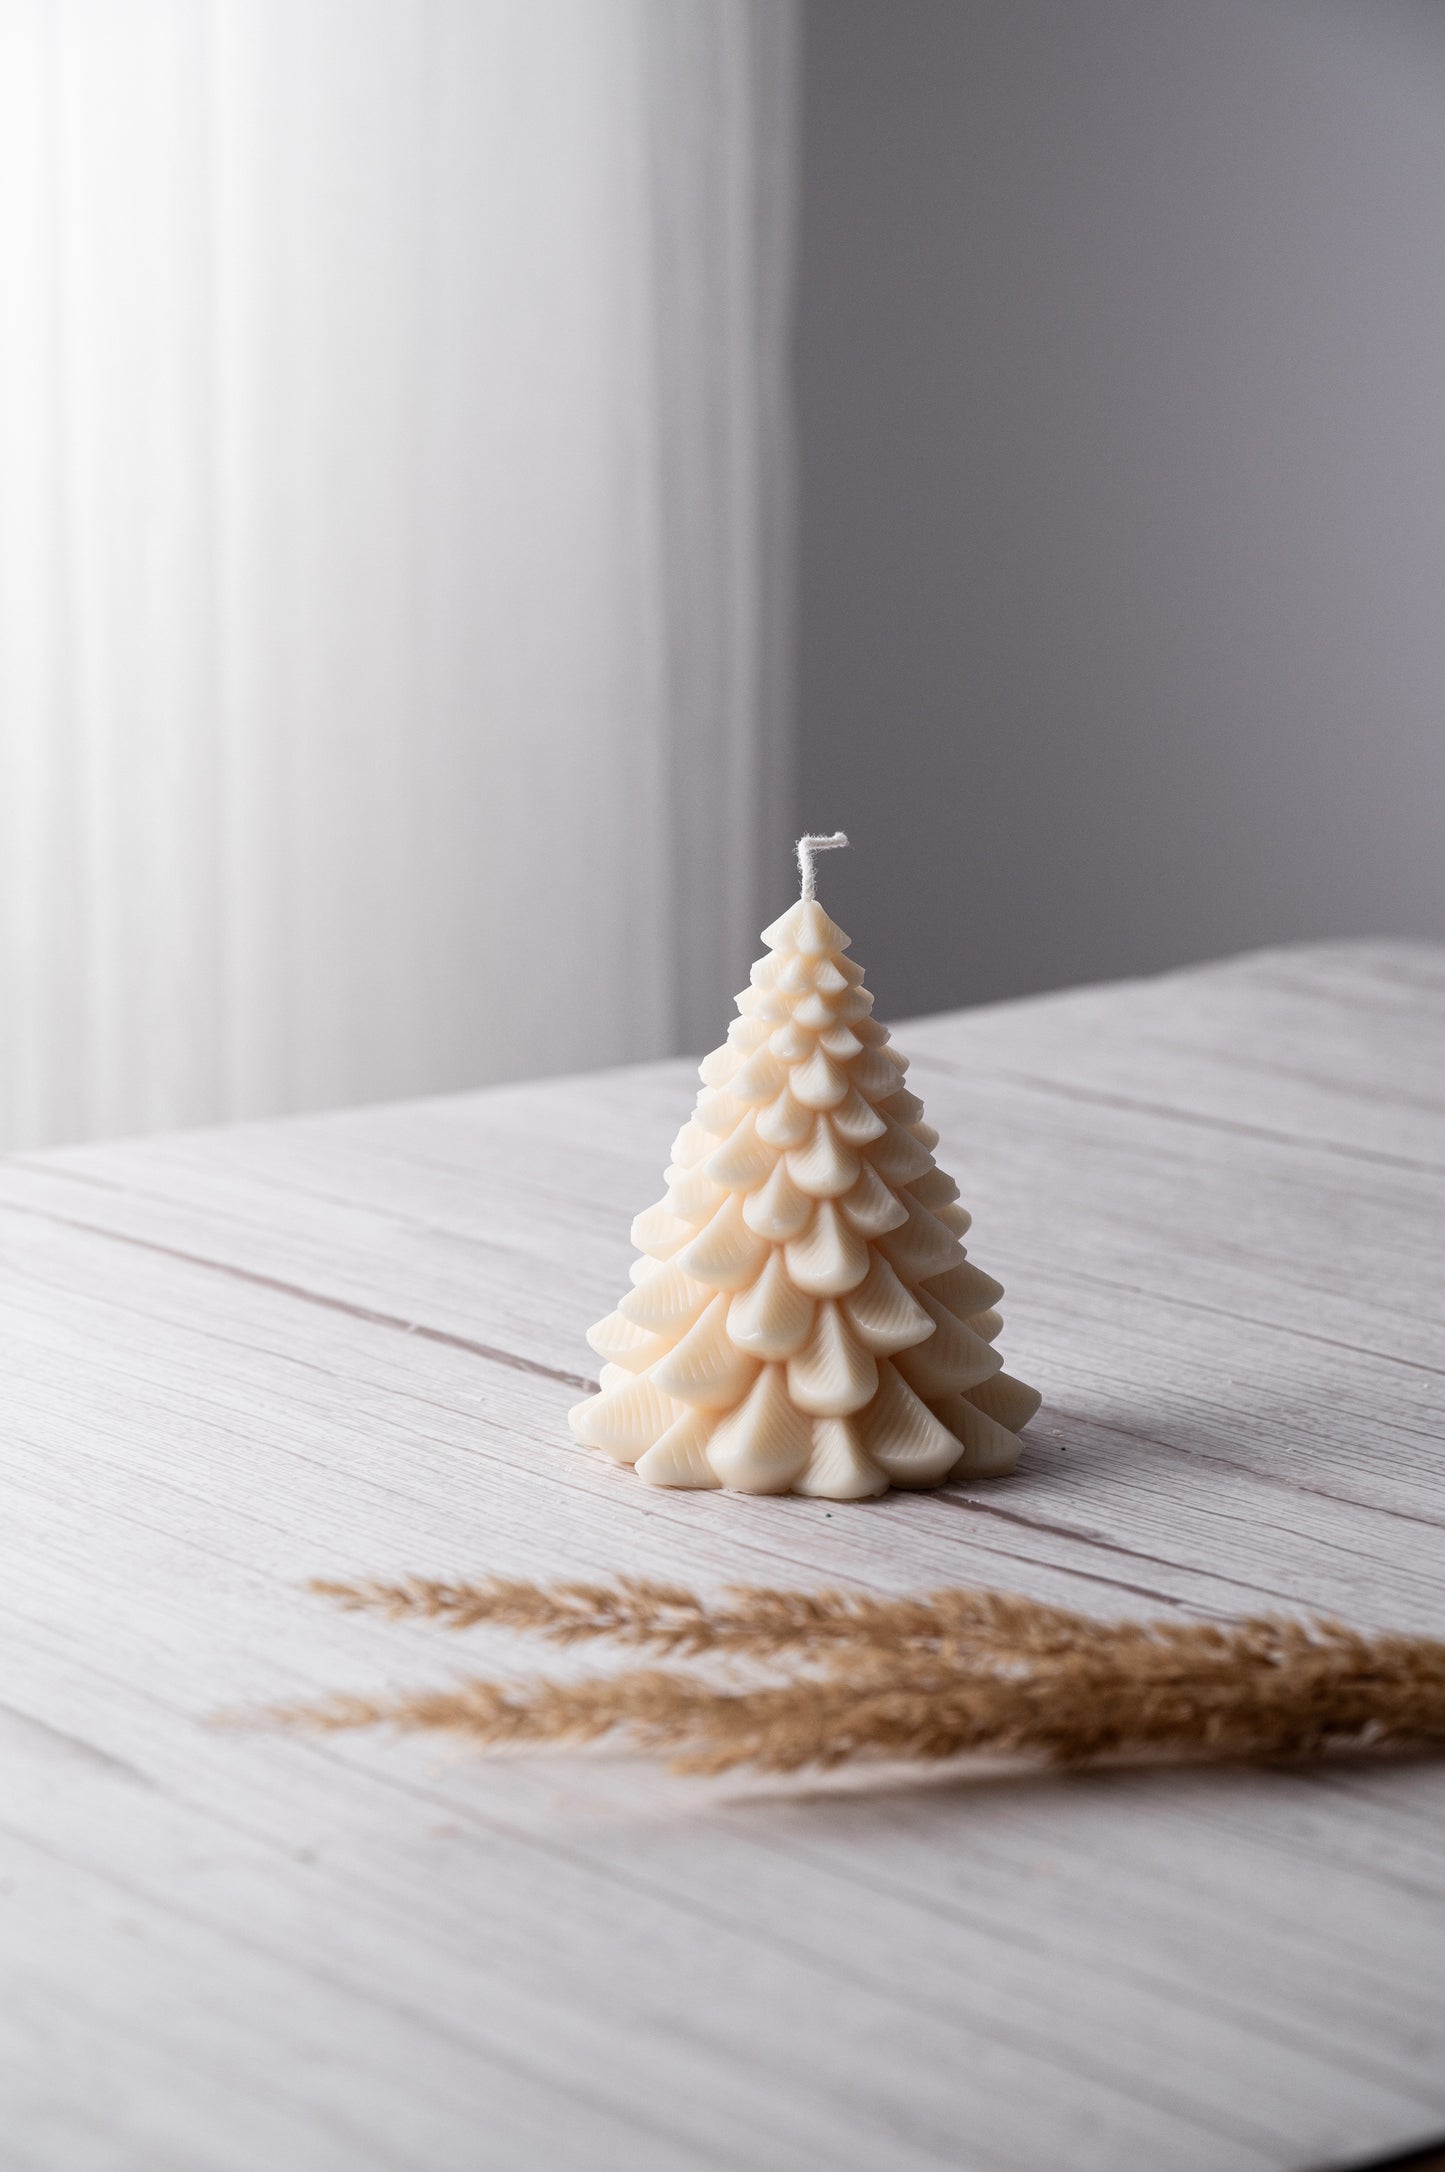 3D Christmas Tree Scented Candle - Festive Holiday Decor